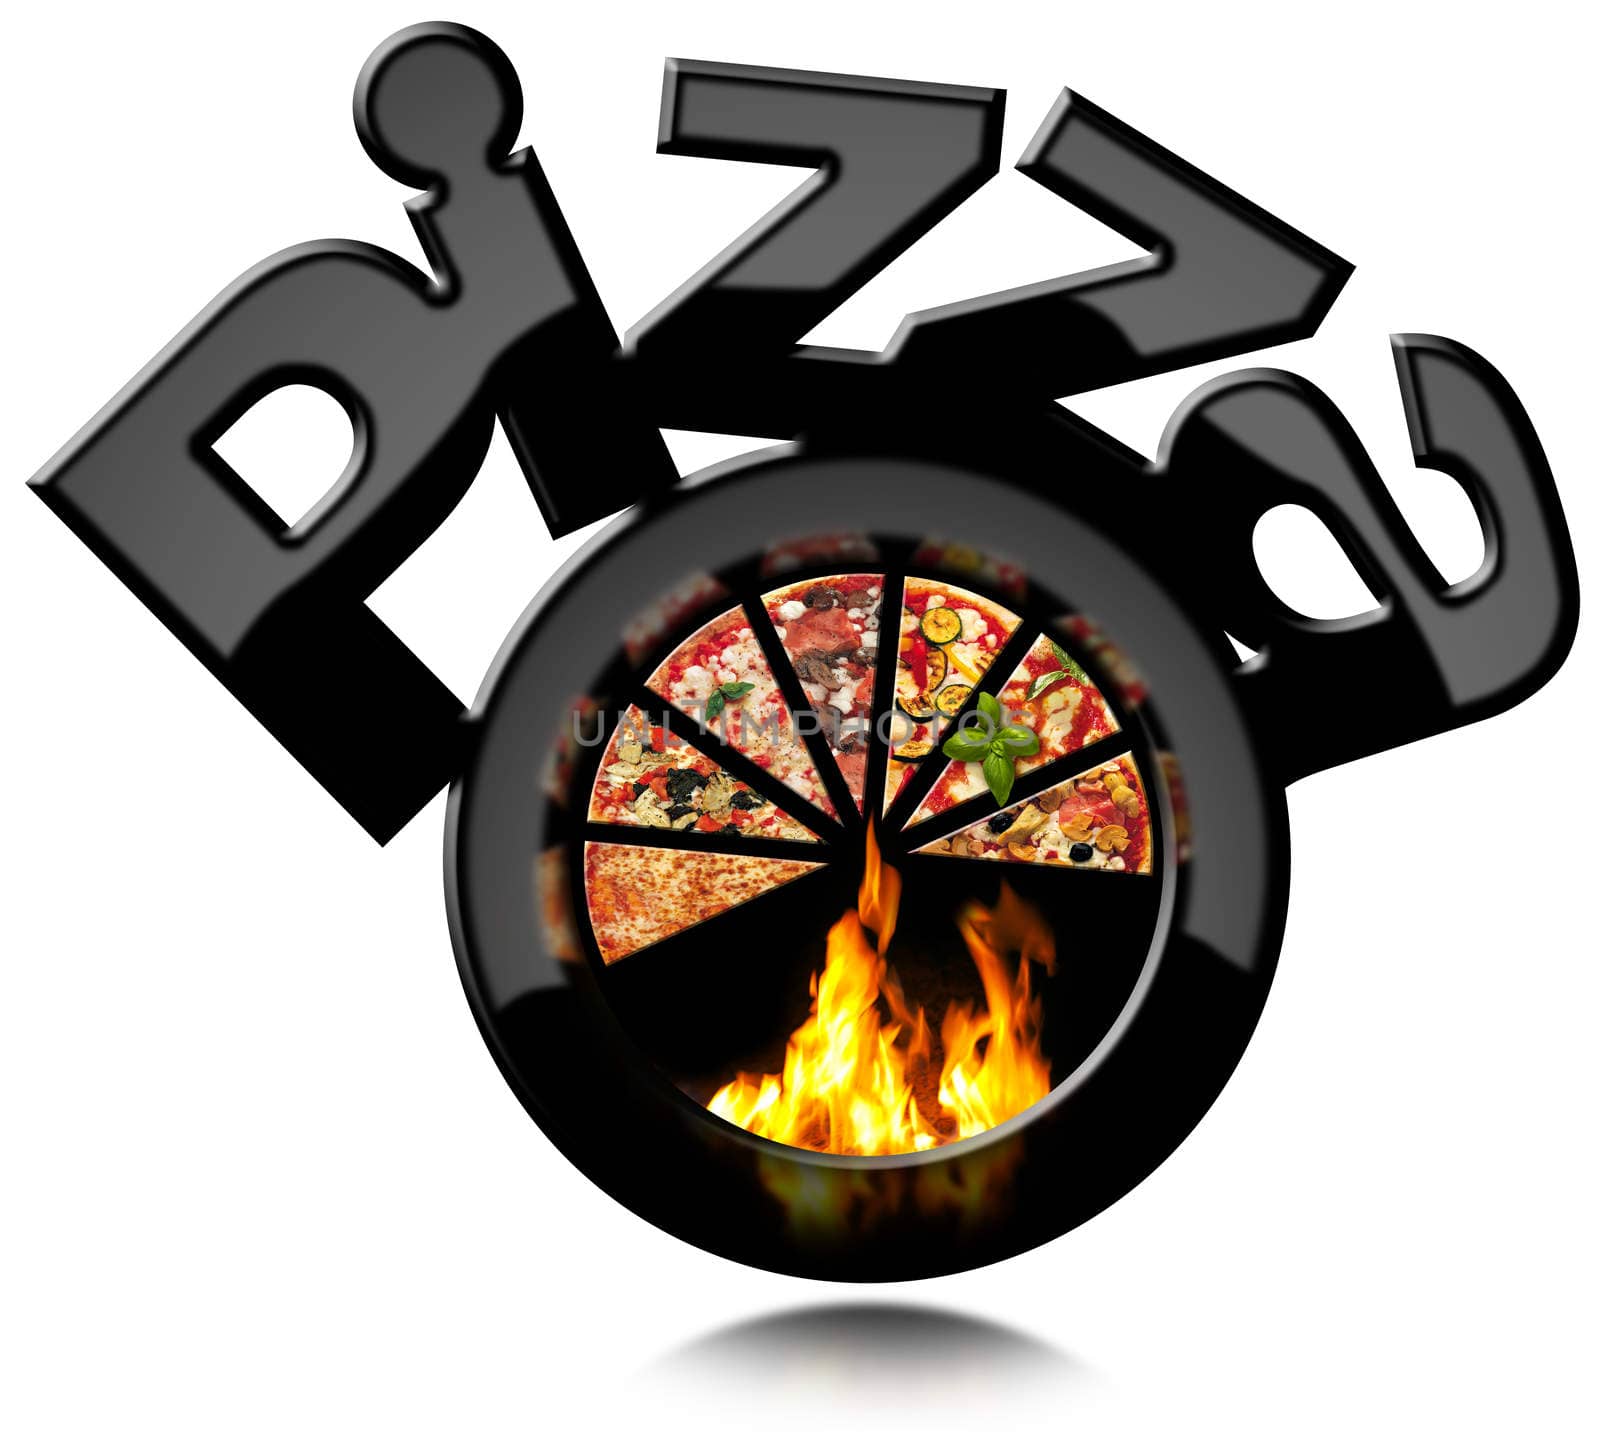 Round and black symbol with a slices of pizza, flames and text Pizza. Isolated on white background